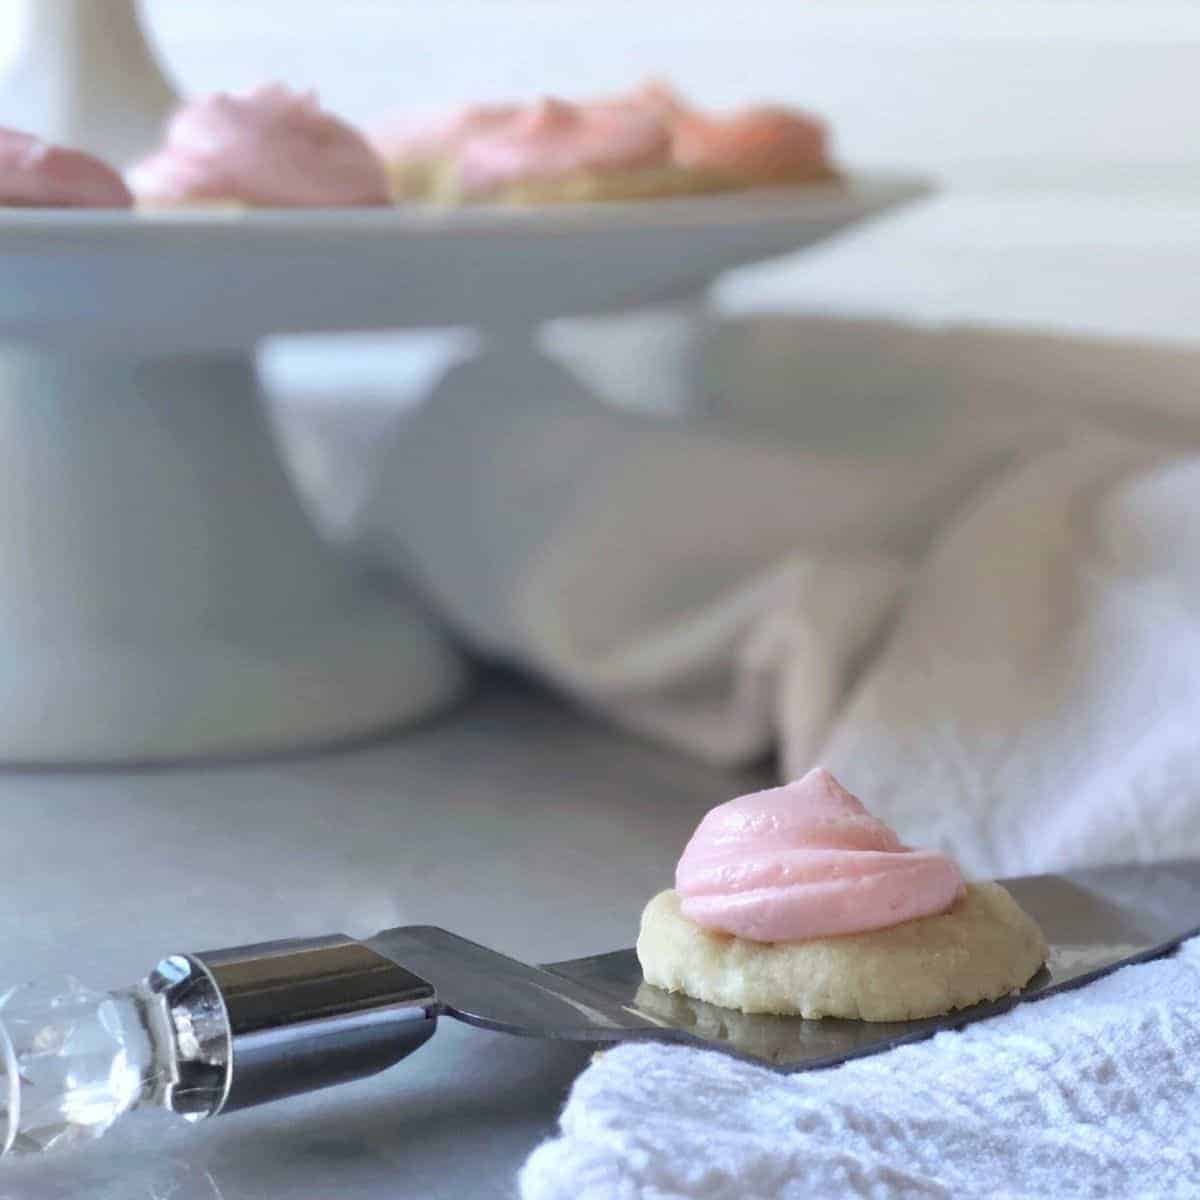 tiny sugar sugar cookie with swirl of pink frosting sitting on cake server with background platter of more cookies.